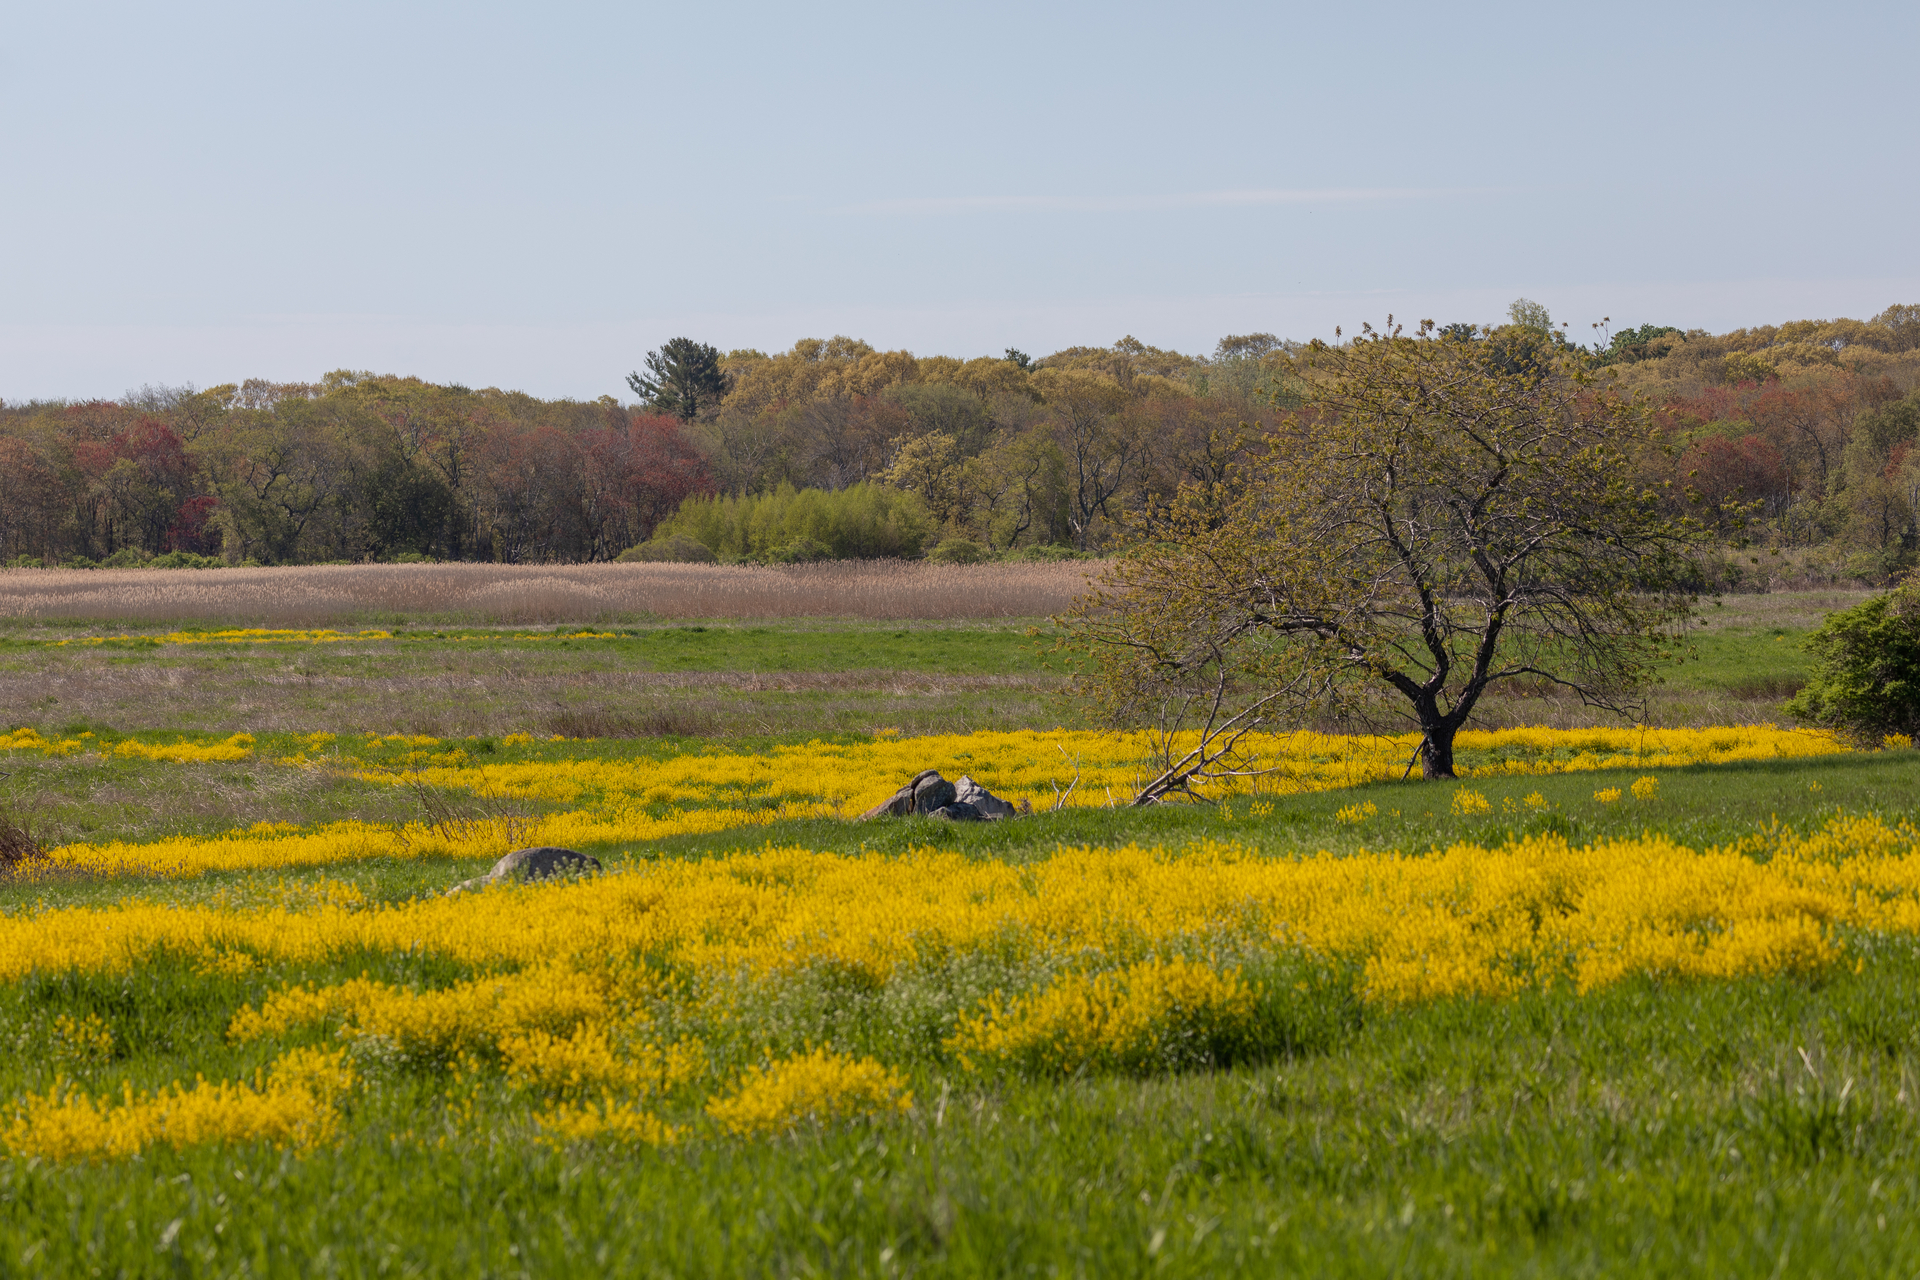 A sprawling meadow with gold flowers.  A single tree stands in the middle, with the rest on the edge of the meadow.